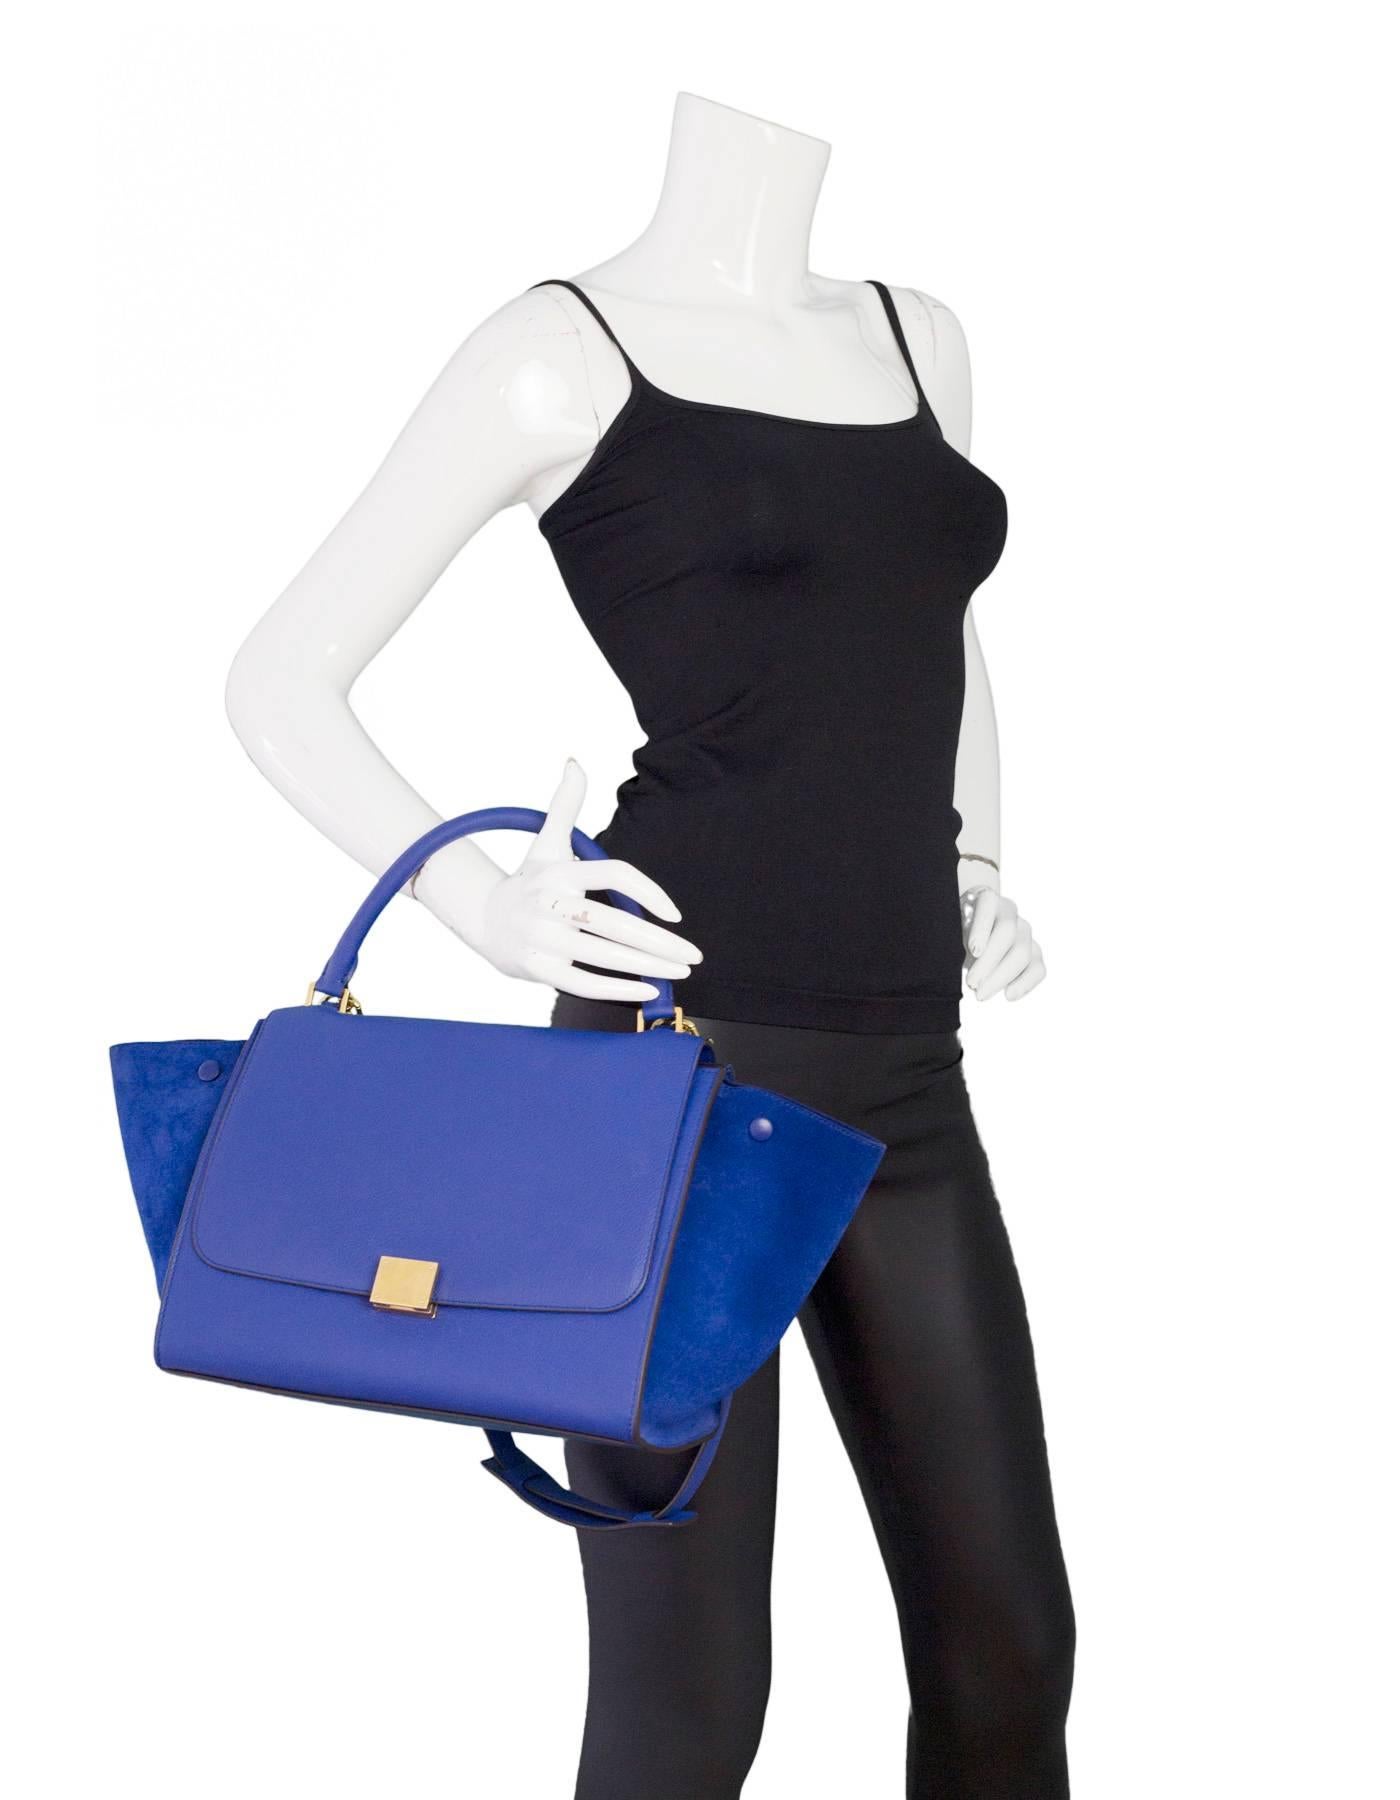 100% Authentic Celine Blue Medium Trapeze Bag. Features leather flap top with clasp closure and suede trapeze side panels. Goldtone hardware, rolled top handle, detachable shoulder strap, back zip pocket. Blue leather interior lining with two